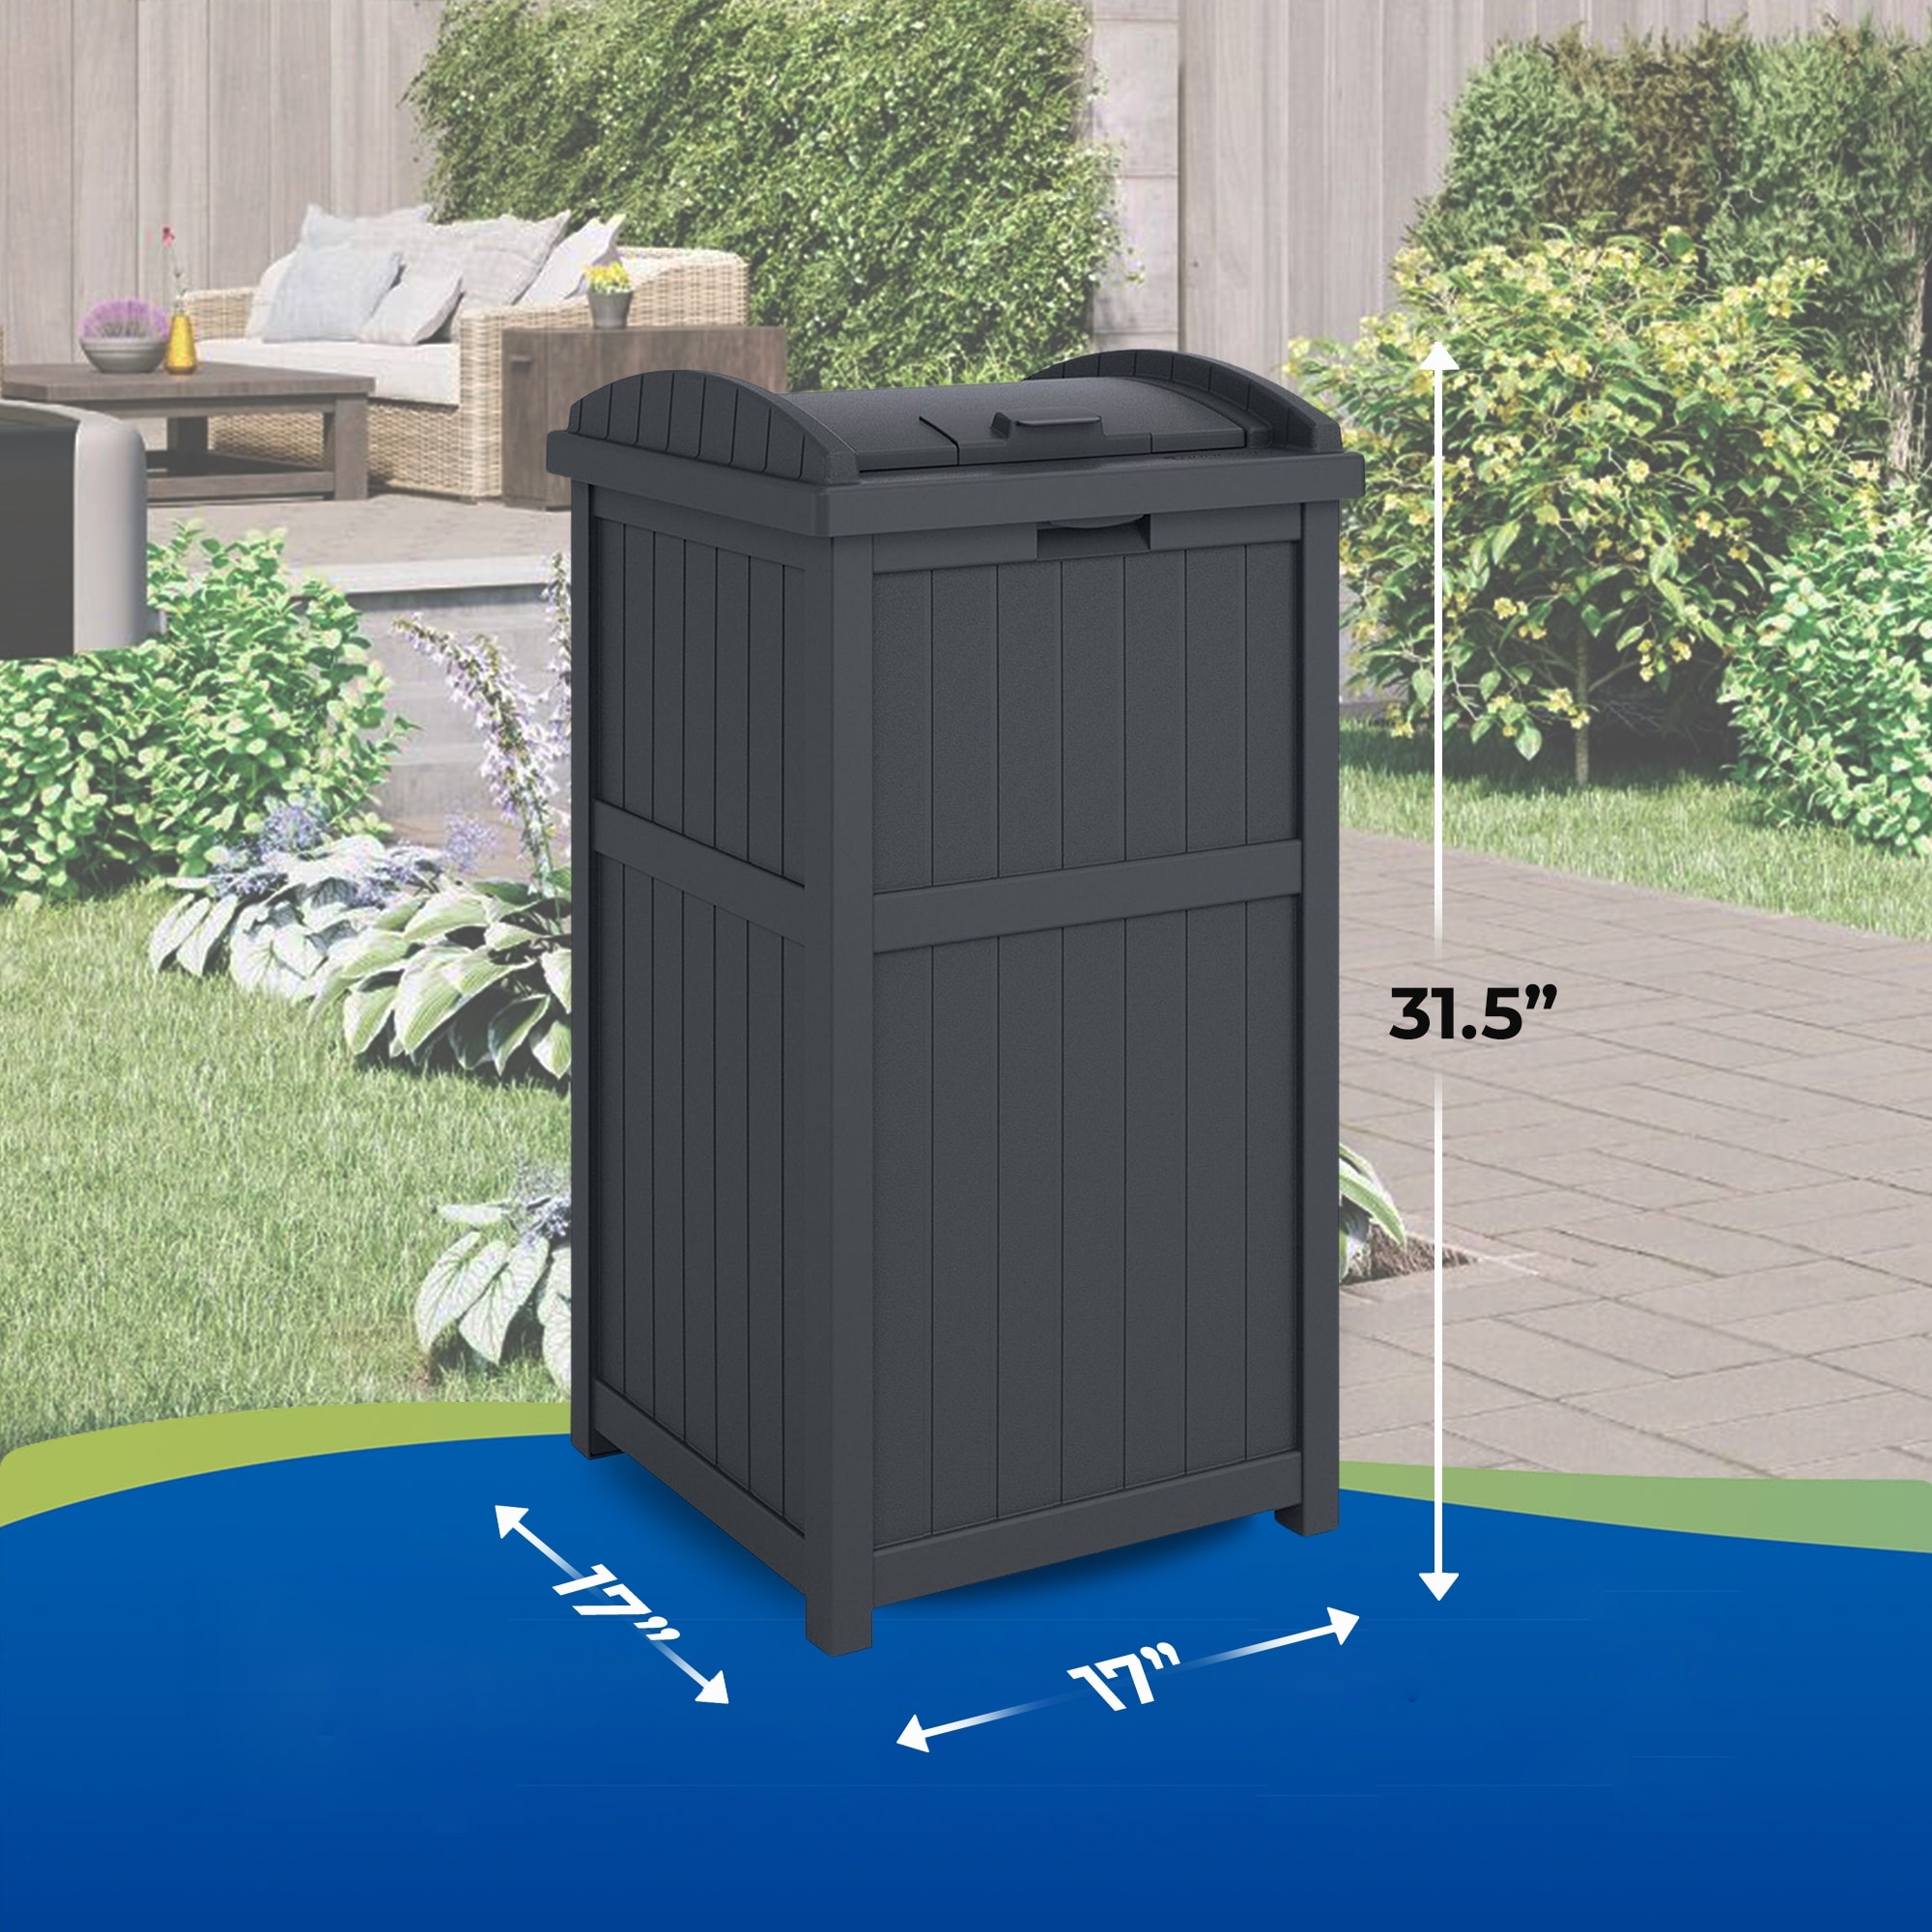 https://ak1.ostkcdn.com/images/products/is/images/direct/a90e3a780f400d2fb4a8c0cc74db08861567ee20/Suncast-Trashcan-Hideaway-Outdoor-33-Gallon-Garbage-Trash-Waste-Bin%2C-Cyberspace.jpg